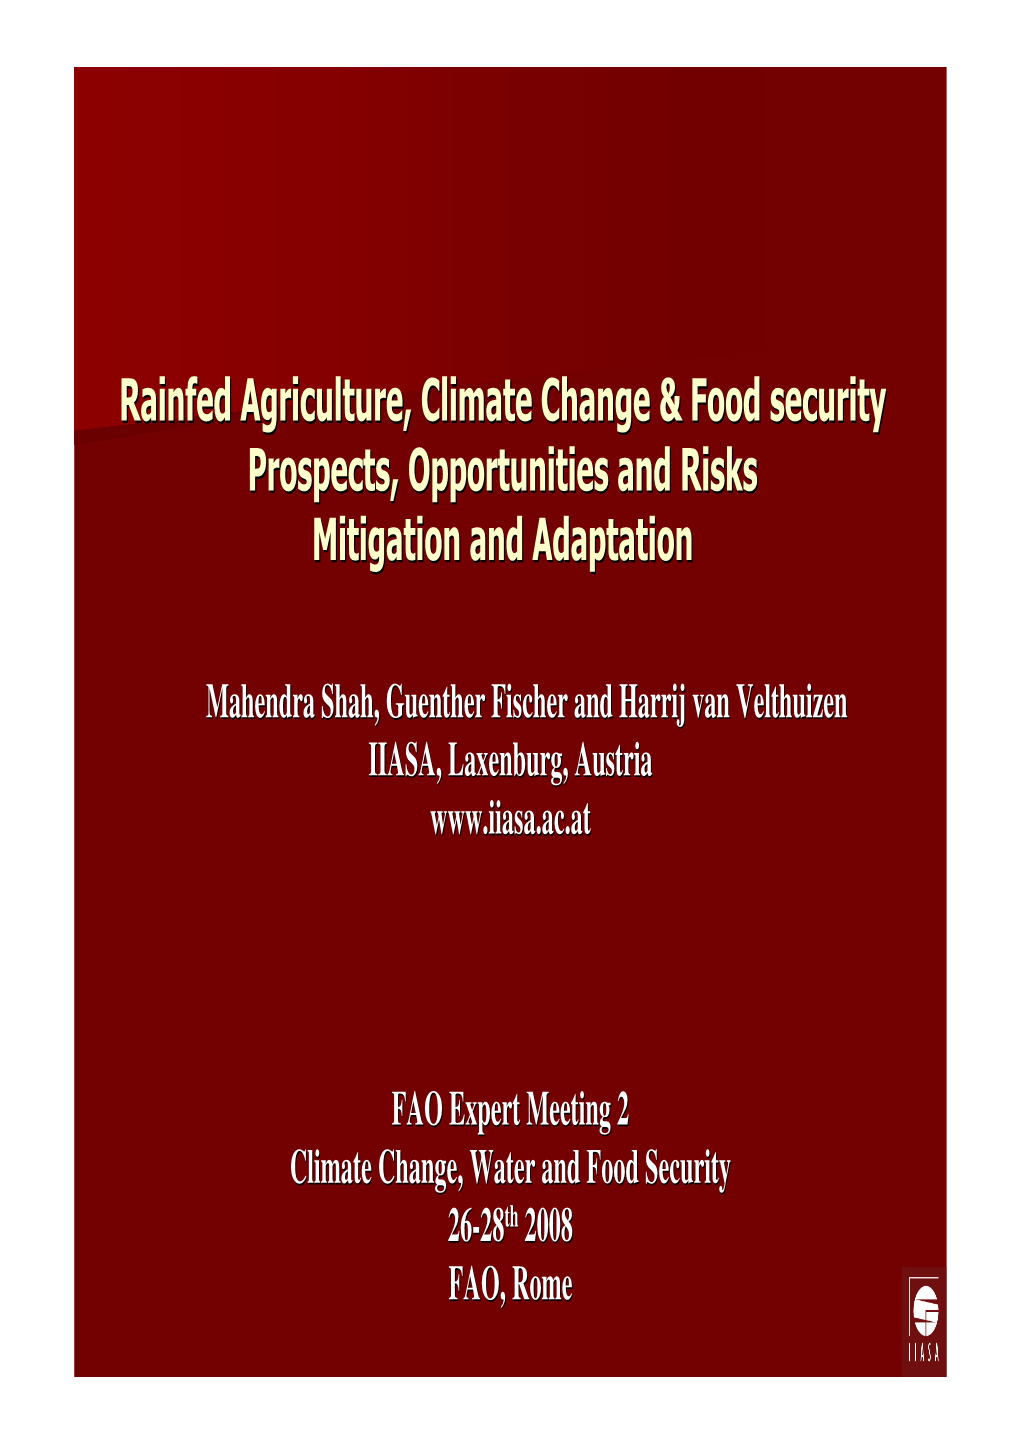 Rainfed Agriculture, Climate Change & Food Security Prospects